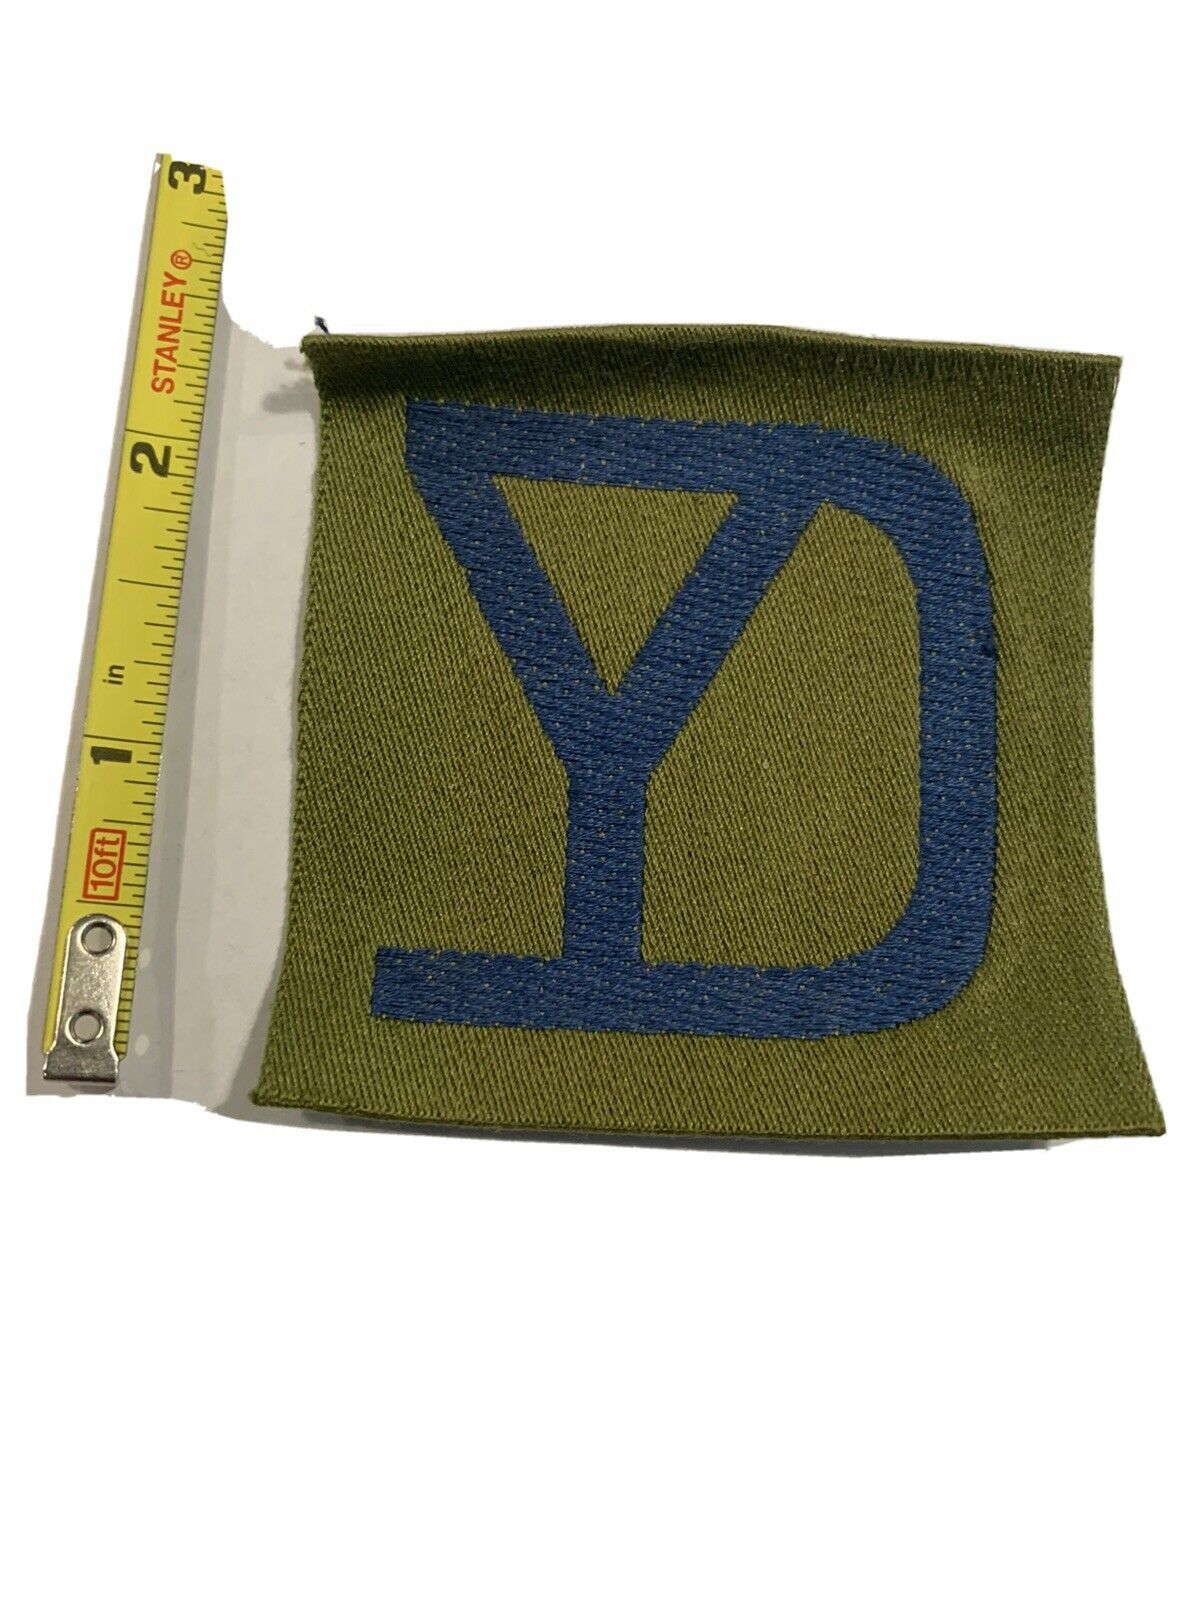 Extremely Rare 26th Infantry Division Liberty Loan Patch.  Rare!!!